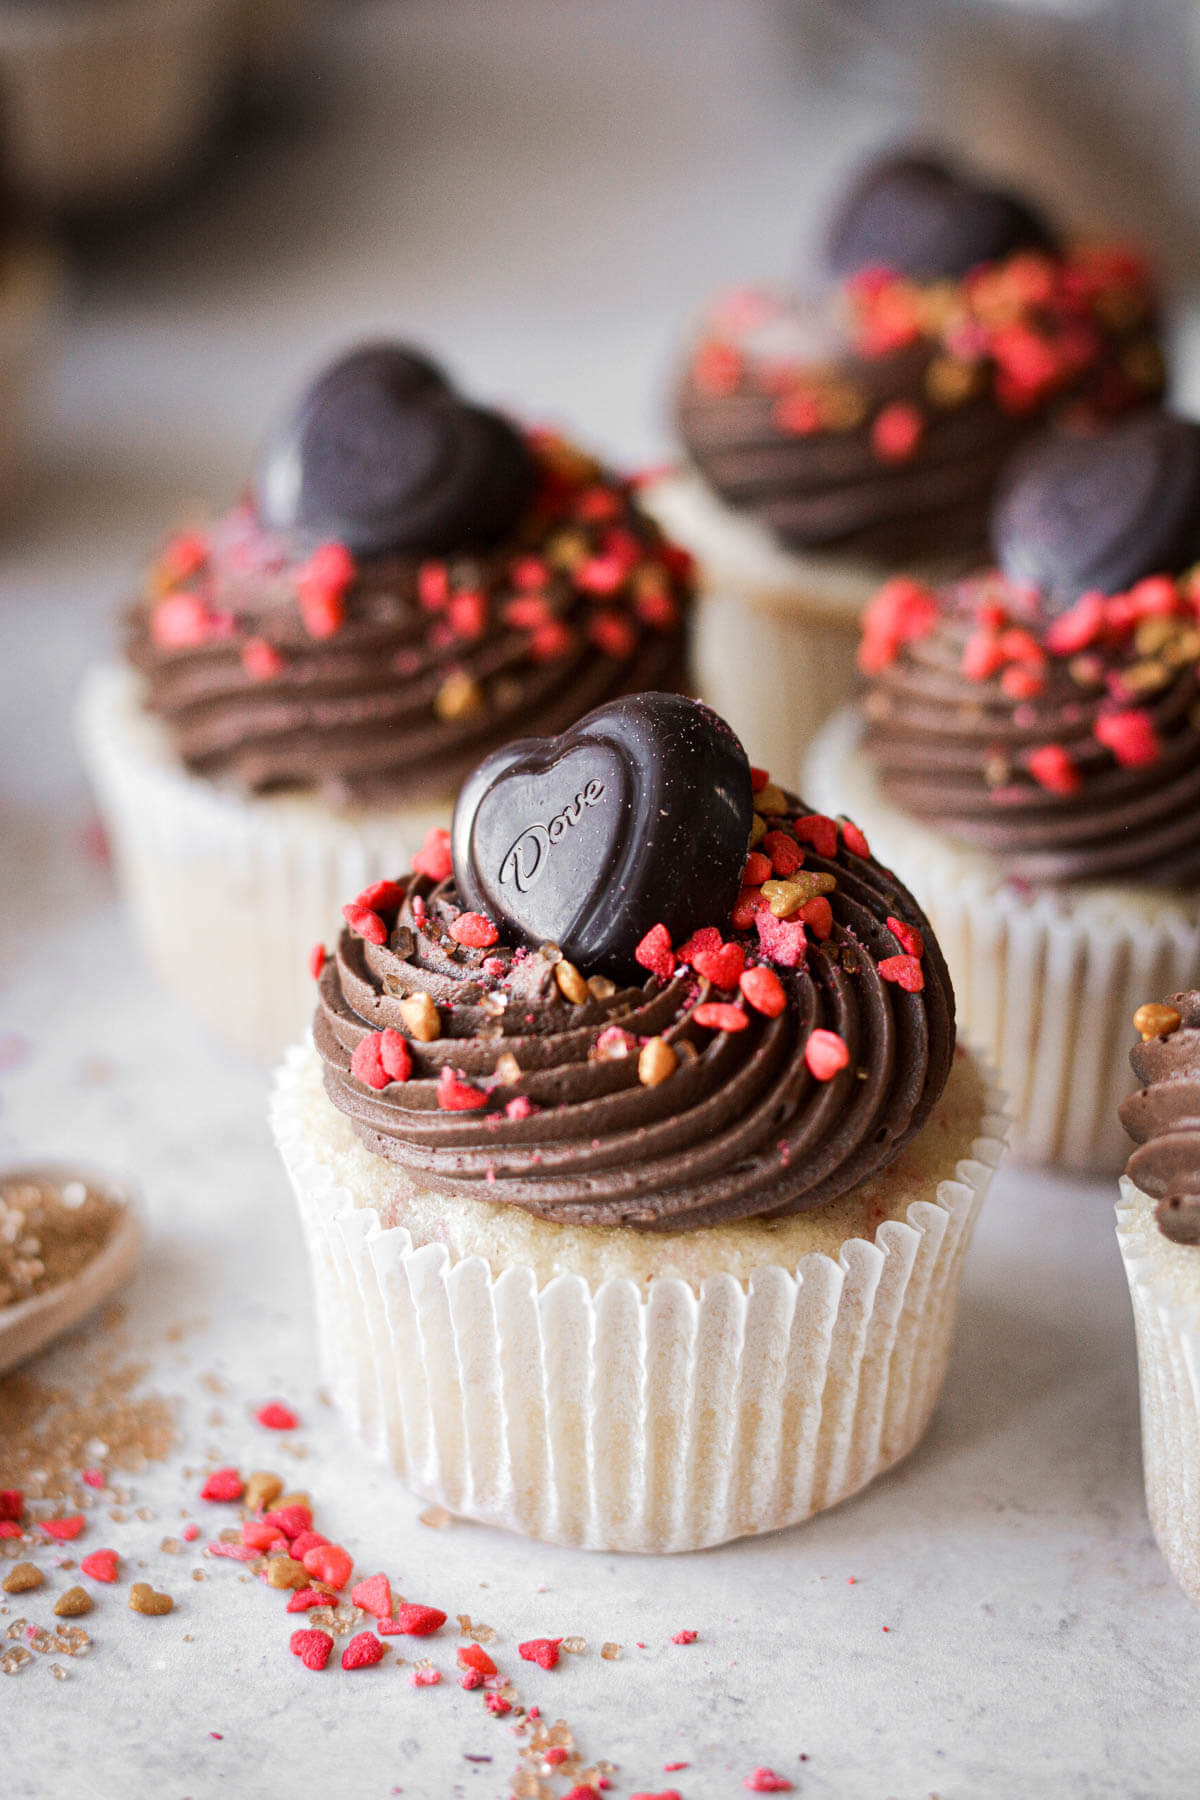 Chocolate hearts and valentines sprinkles on strawberry chocolate cupcakes.